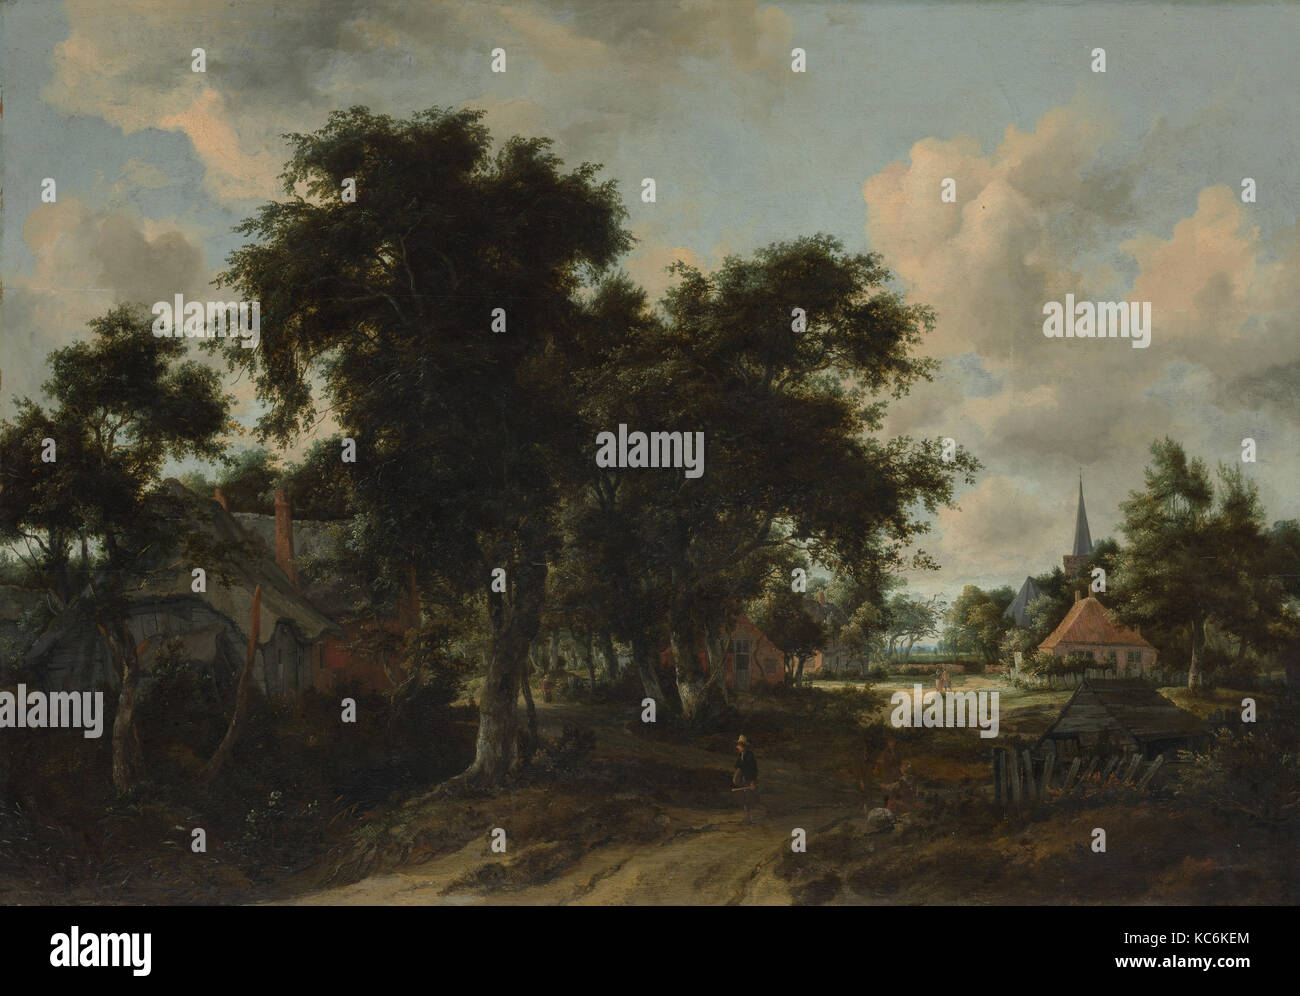 Entrance to a Village, ca. 1665, Oil on wood, 29 1/2 x 43 3/8 in. (74.9 x 110.2 cm), Paintings, Meyndert Hobbema (Dutch Stock Photo